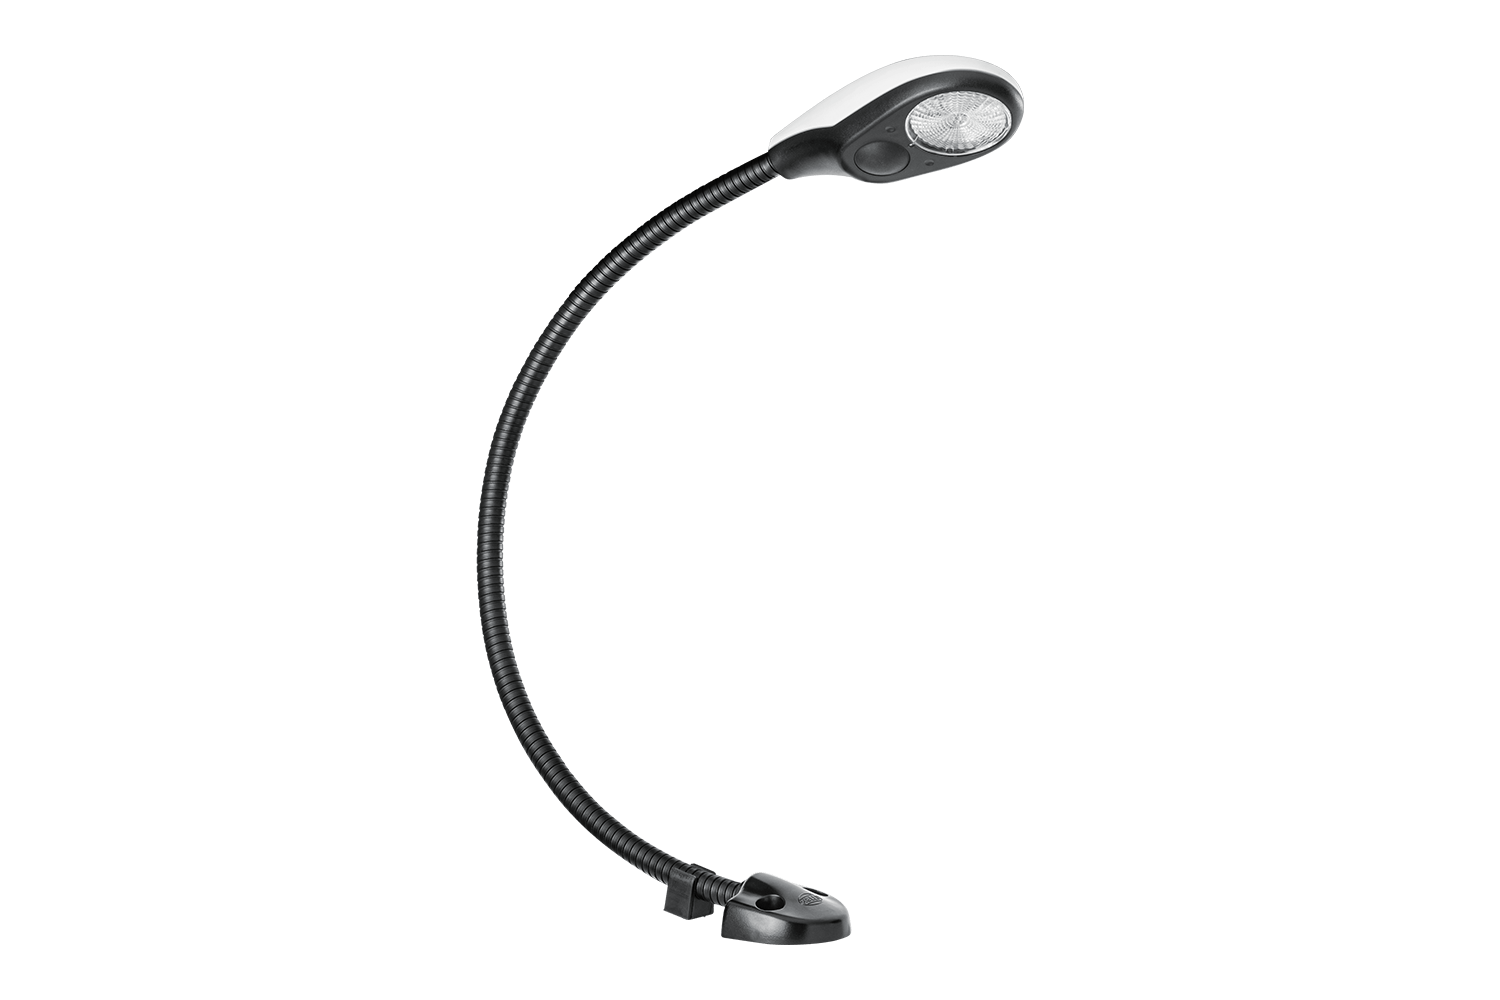 LED Reading lamp 346 720 from Hella offered by Patlon in Canada